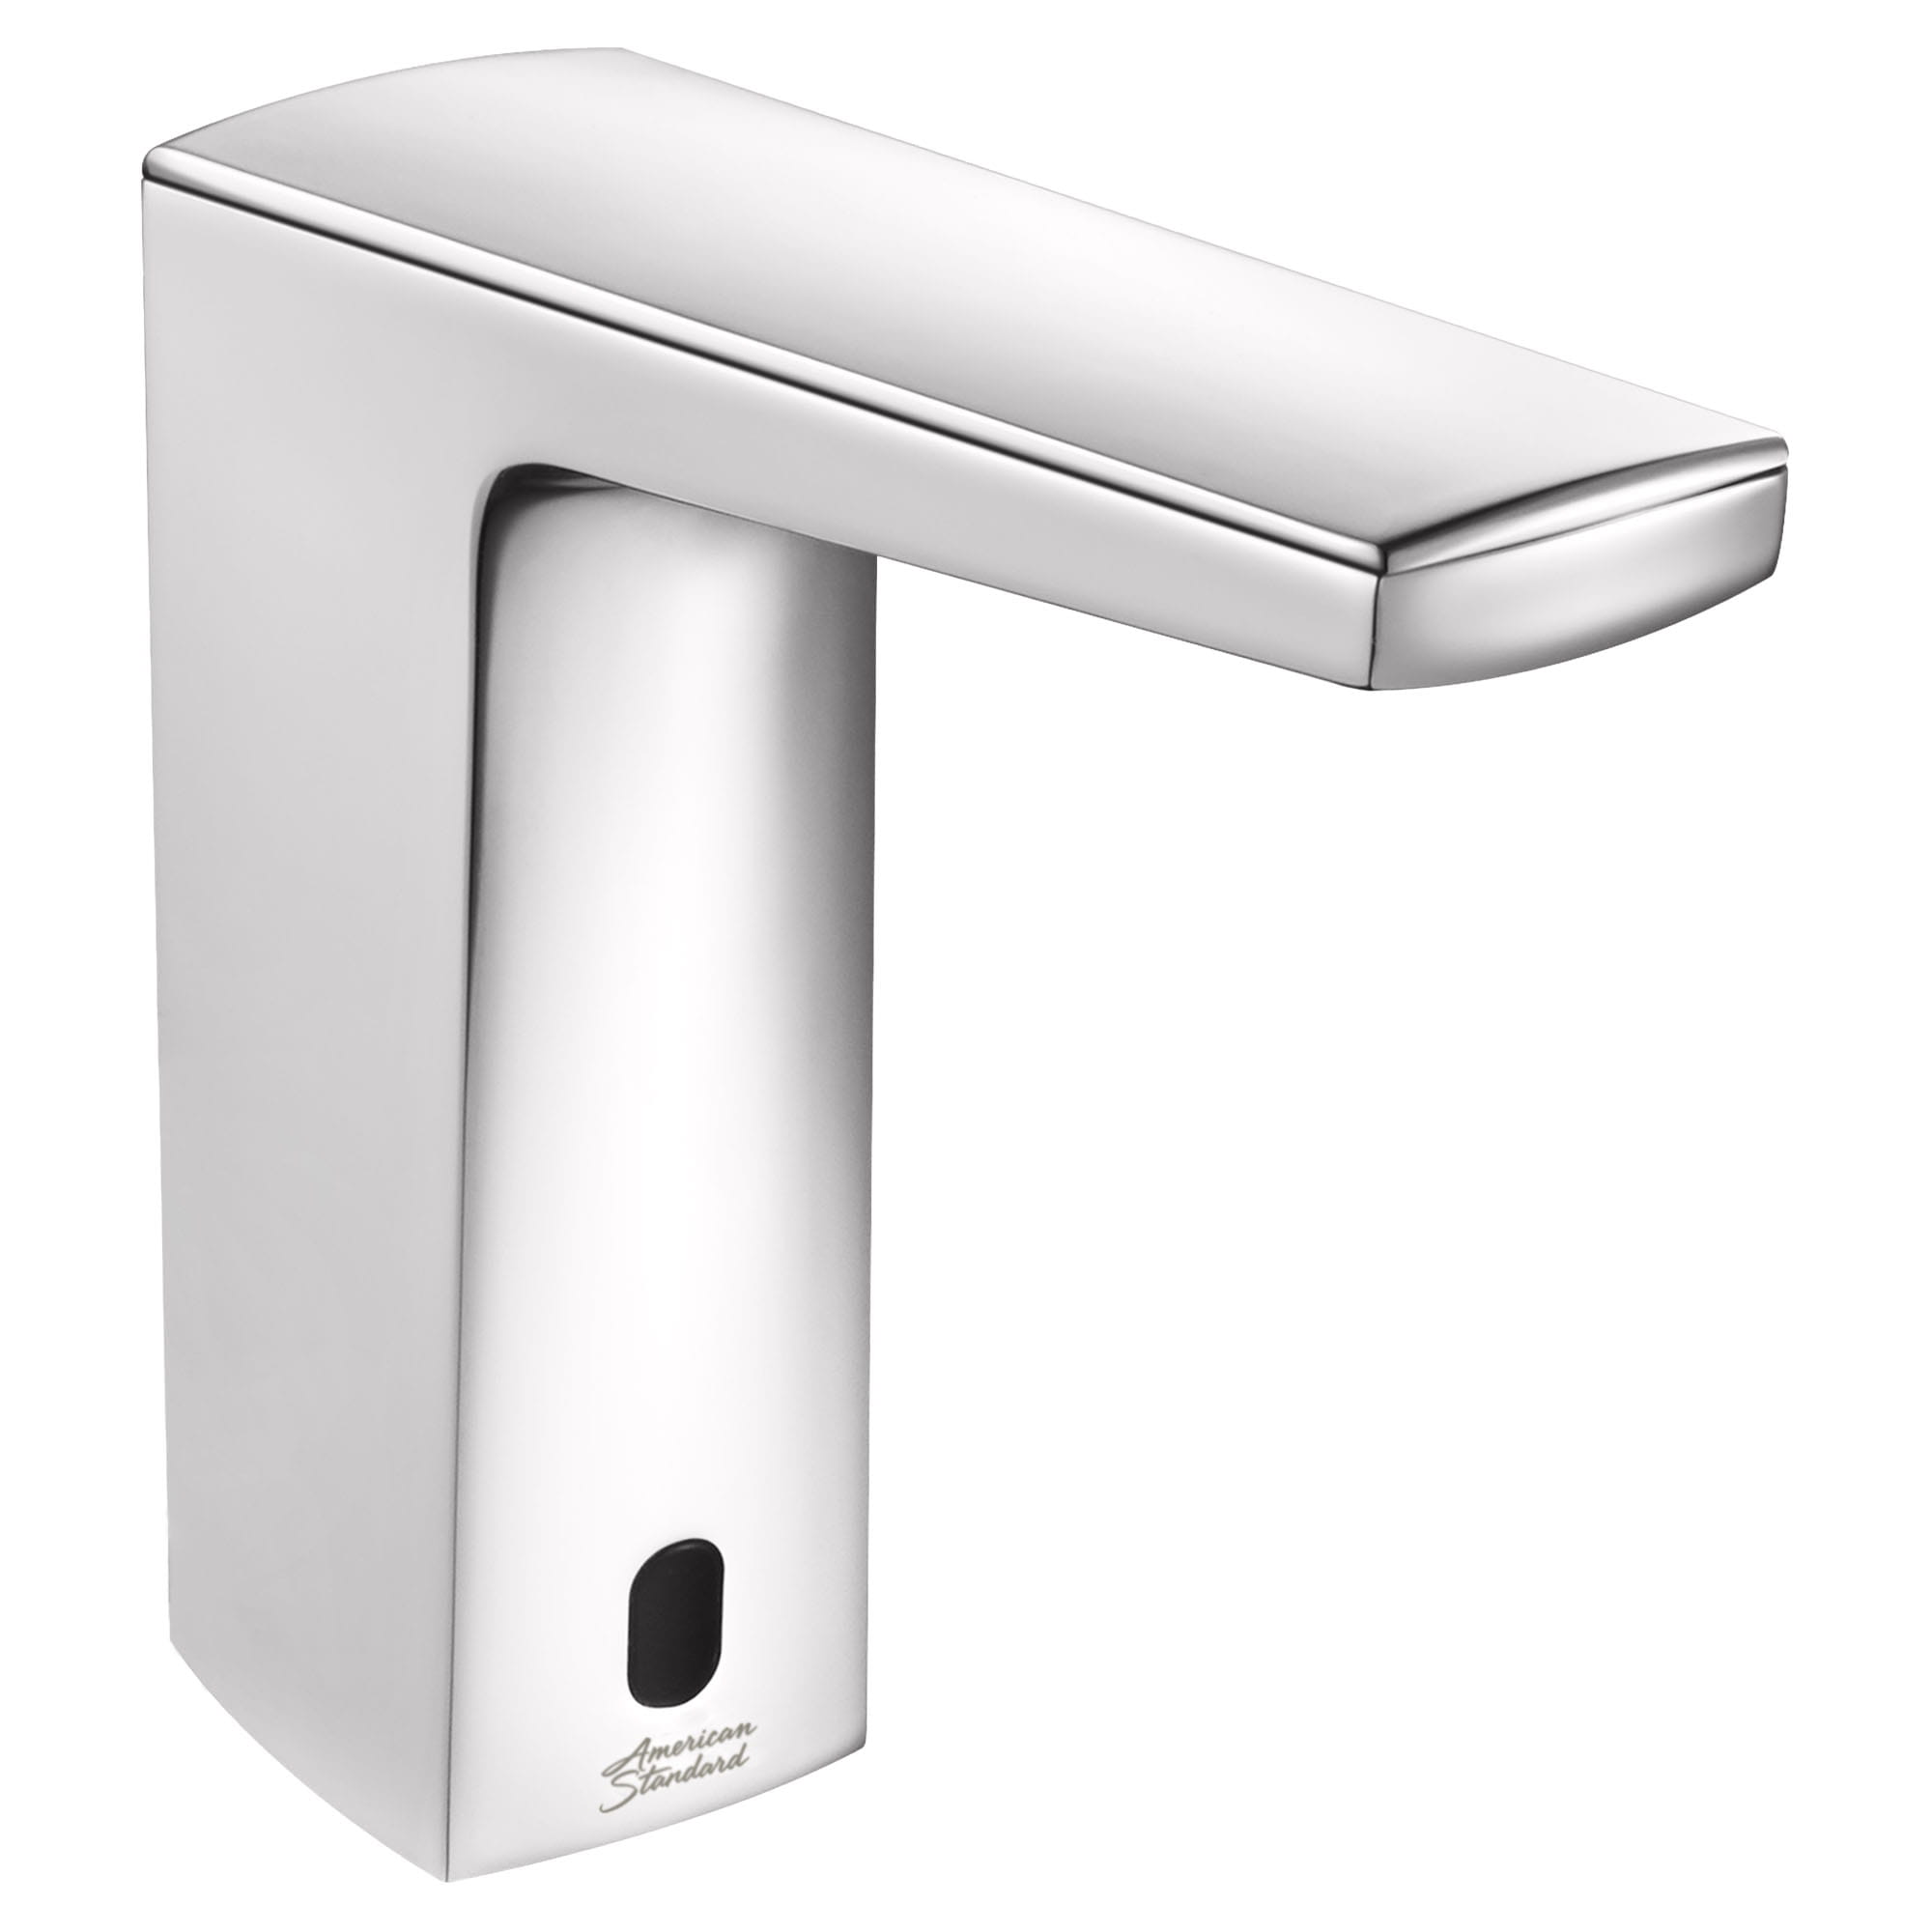 Paradigm Selectronic Touchless Faucet Battery Powered 035 gpm 13 Lpm CHROME